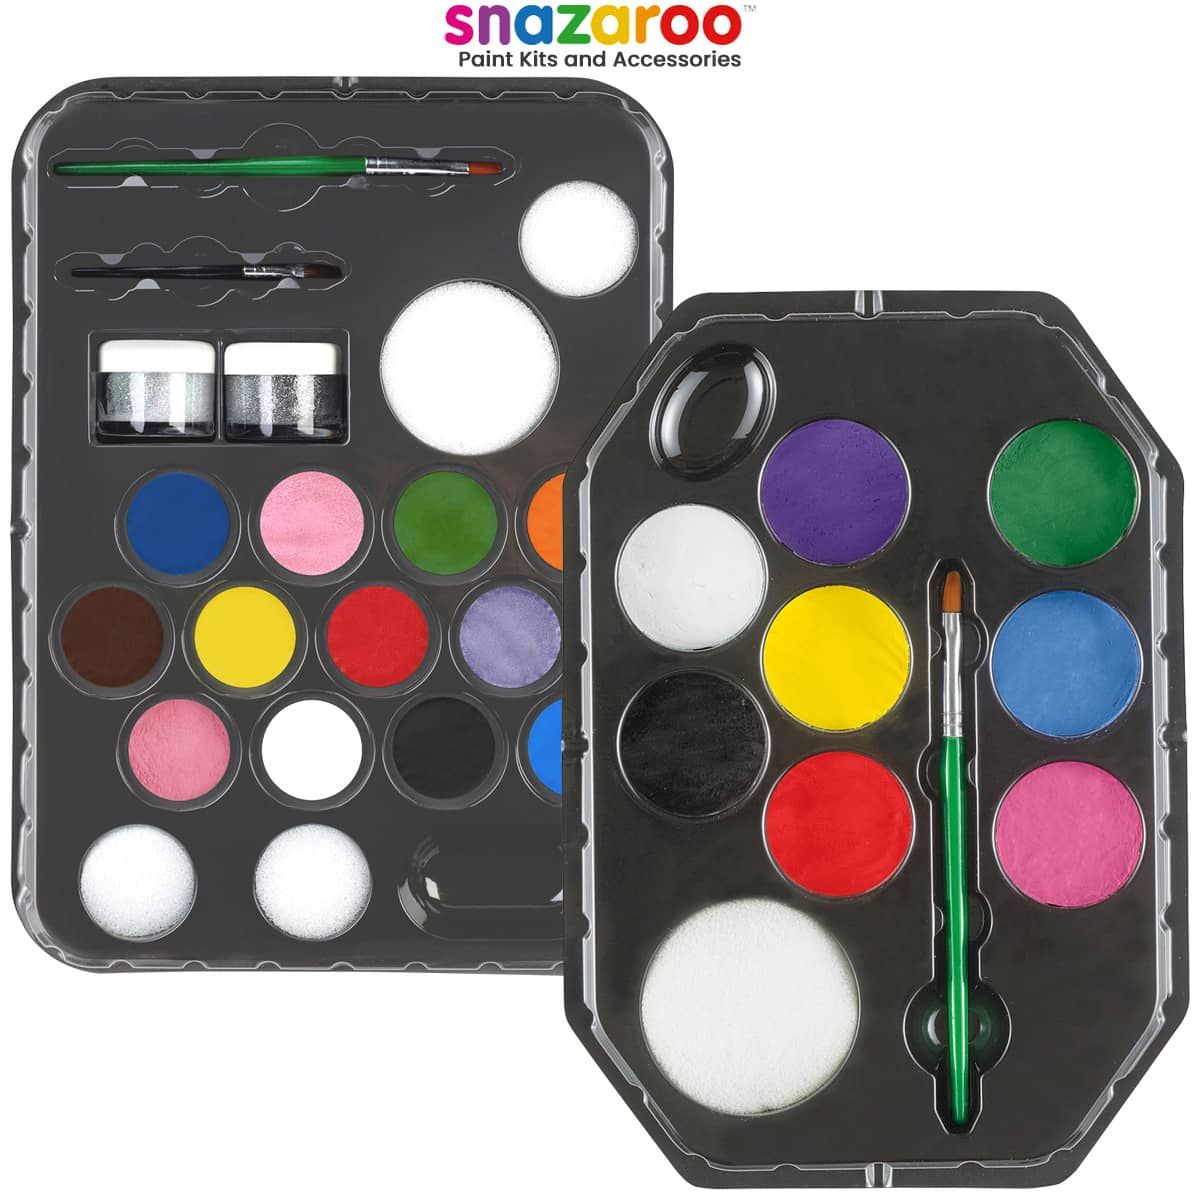 Snazaroo Face Paint Colors Bright Yellow [Pack Of 3]